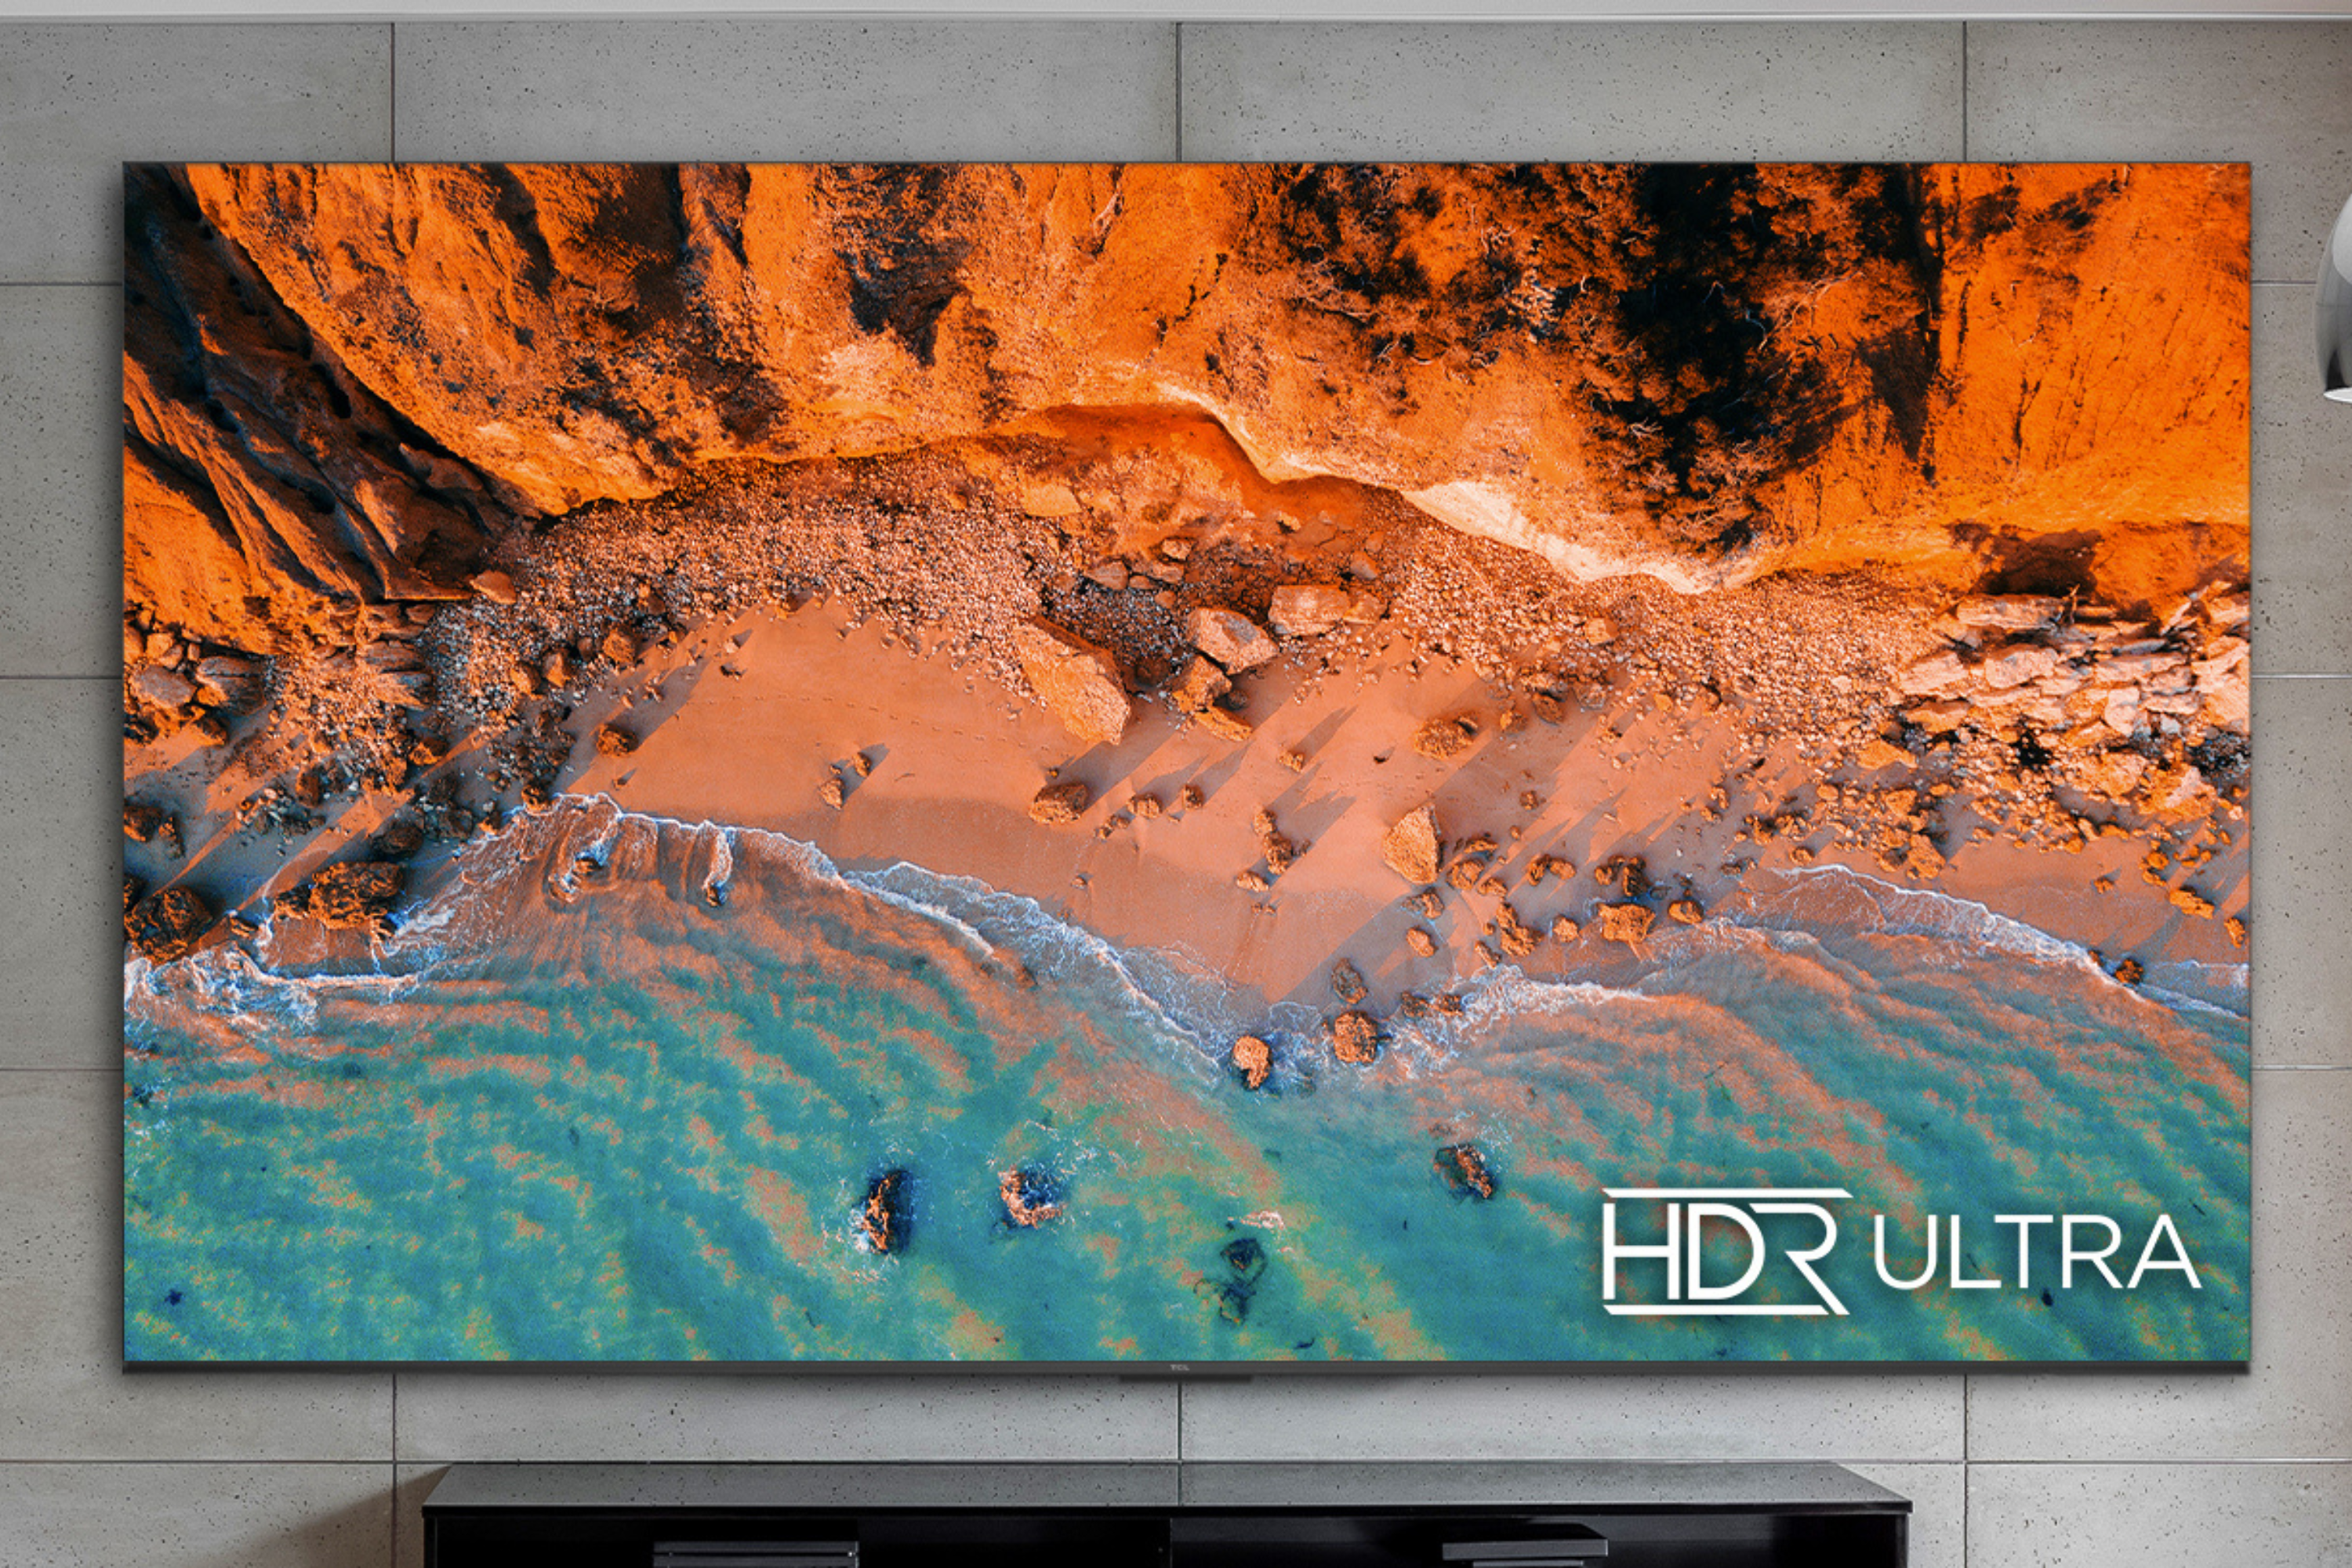 Frameless Full HD HDR TV with Android TV -32 inch TV - S5400AF - TCL Europe